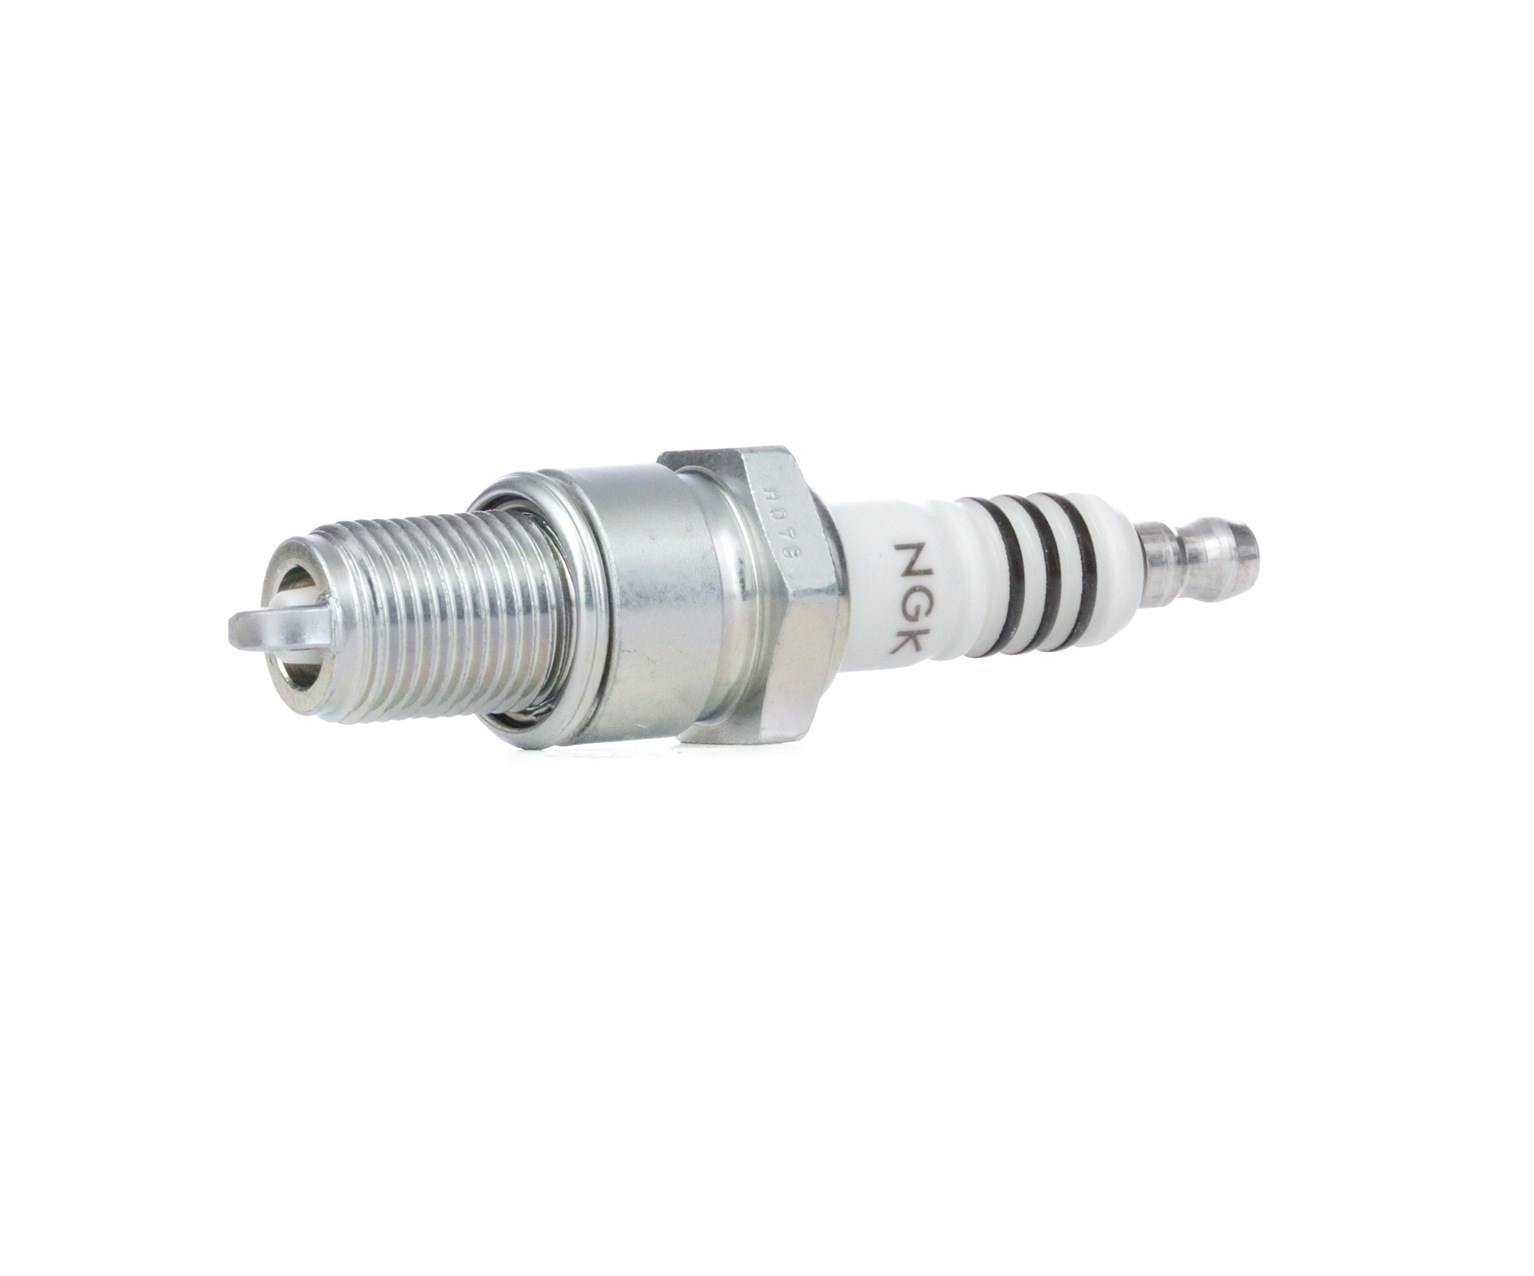 NGK 6684 Spark plug cheap in online store